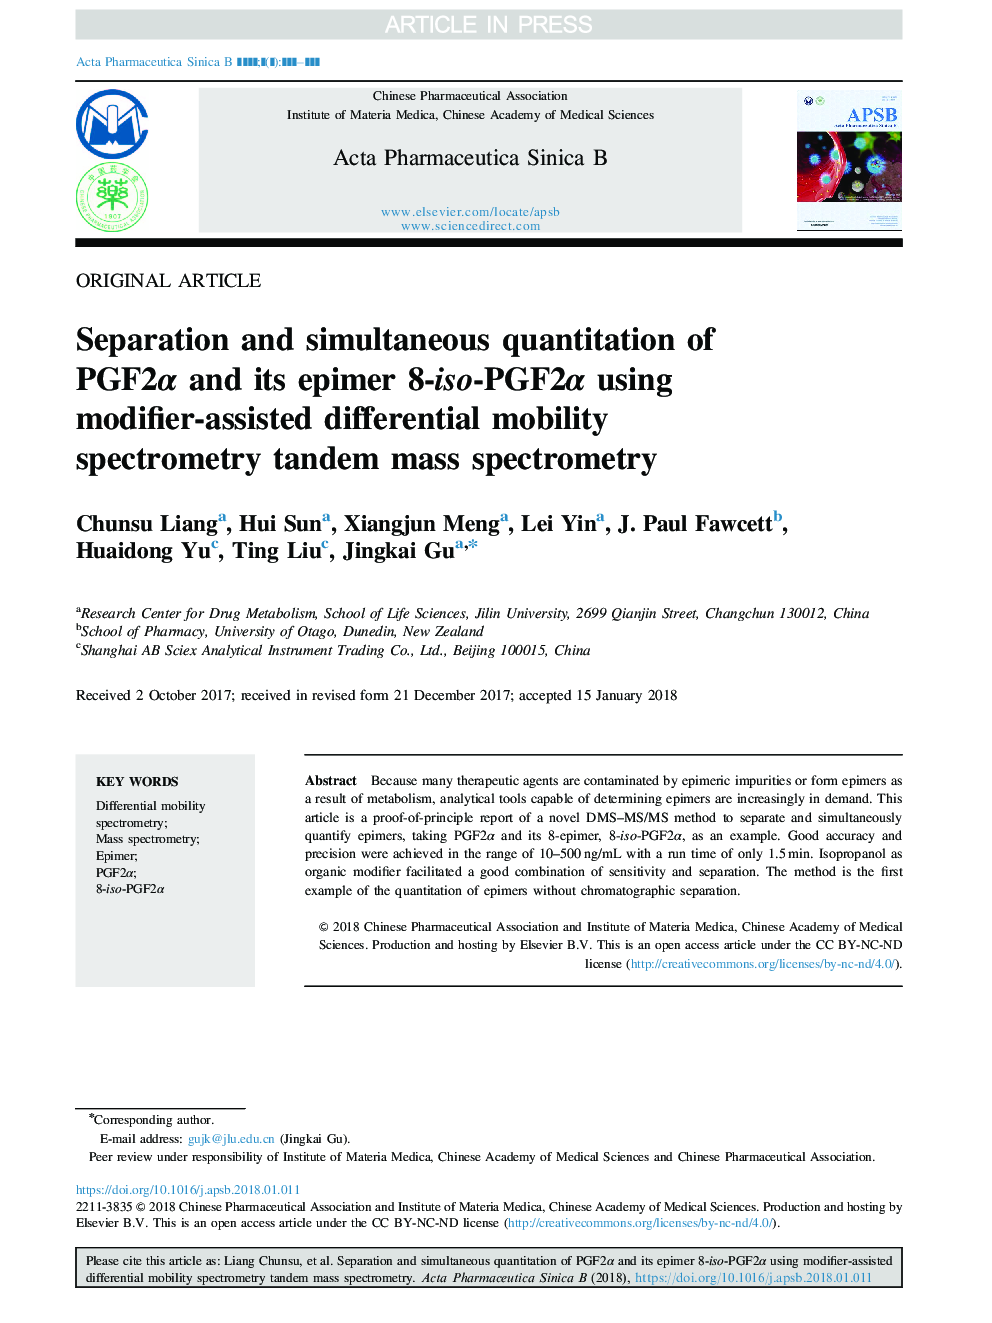 Separation and simultaneous quantitation of PGF2Î± and its epimer 8-iso-PGF2Î± using modifier-assisted differential mobility spectrometry tandem mass spectrometry